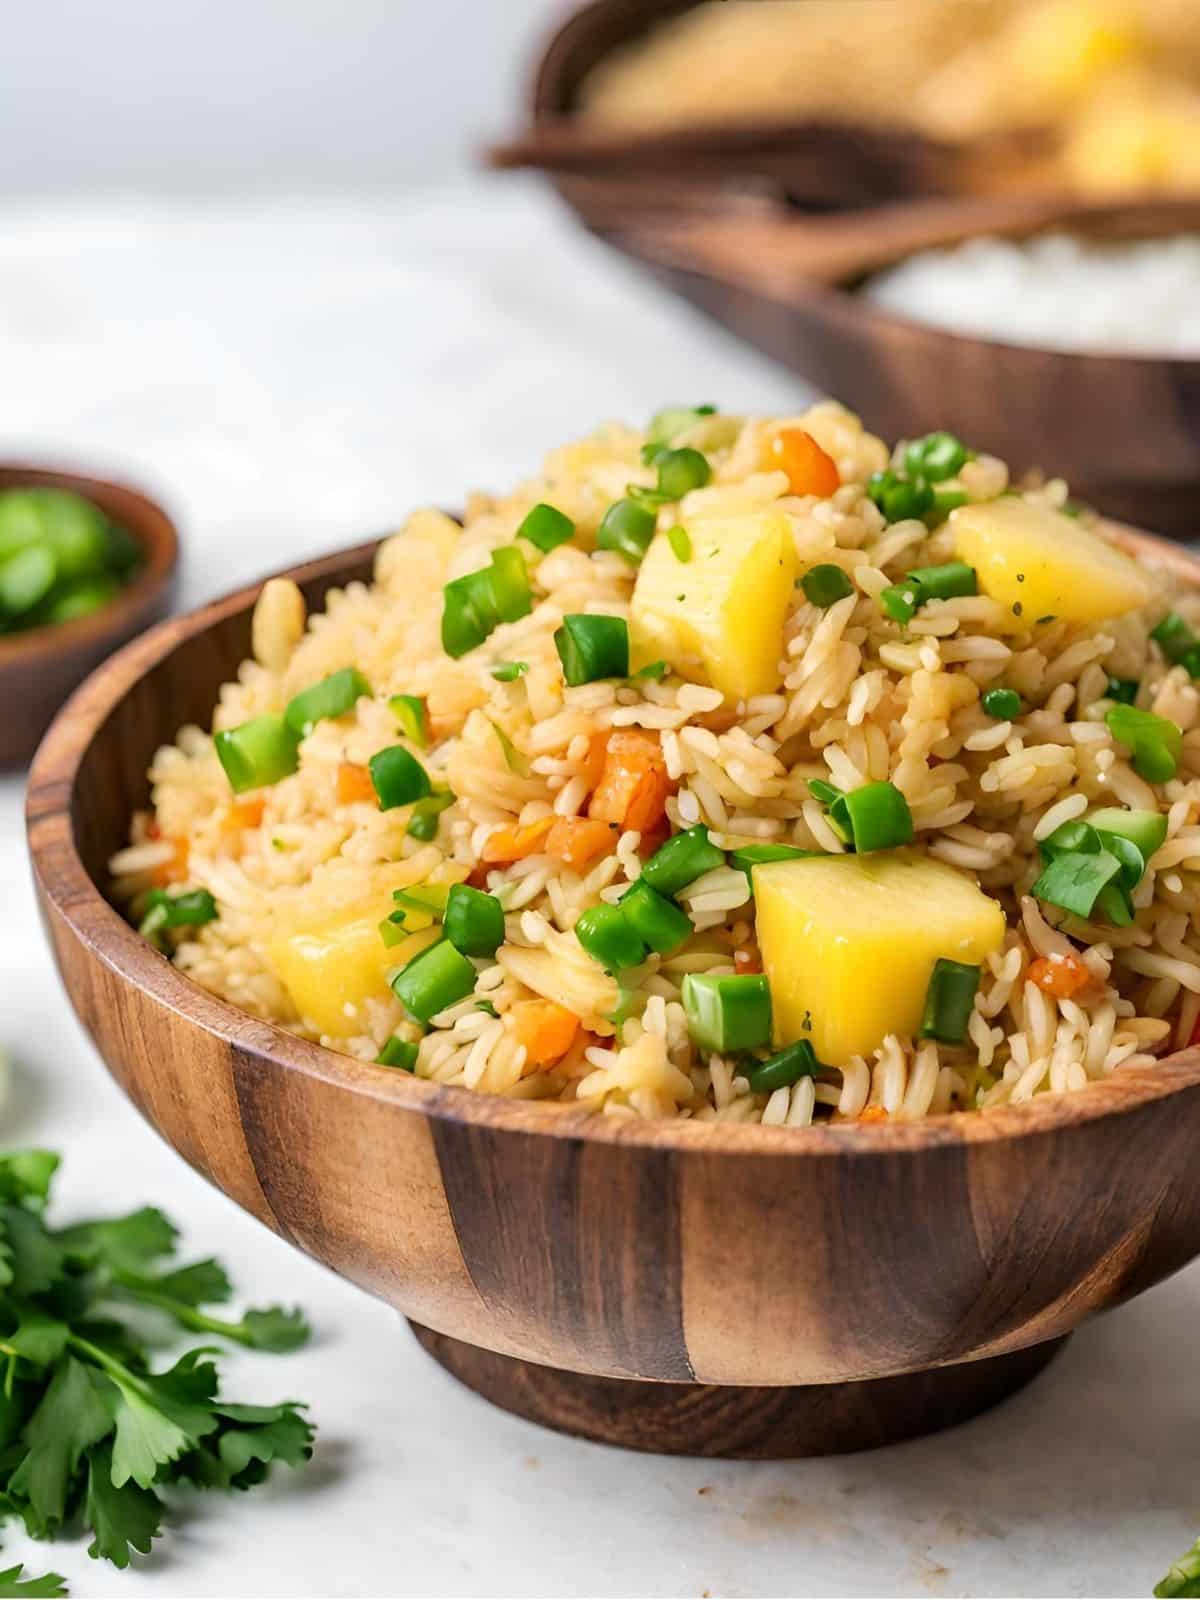 Vegan Thai fried rice with pineapple and green onions in a wood bowl.